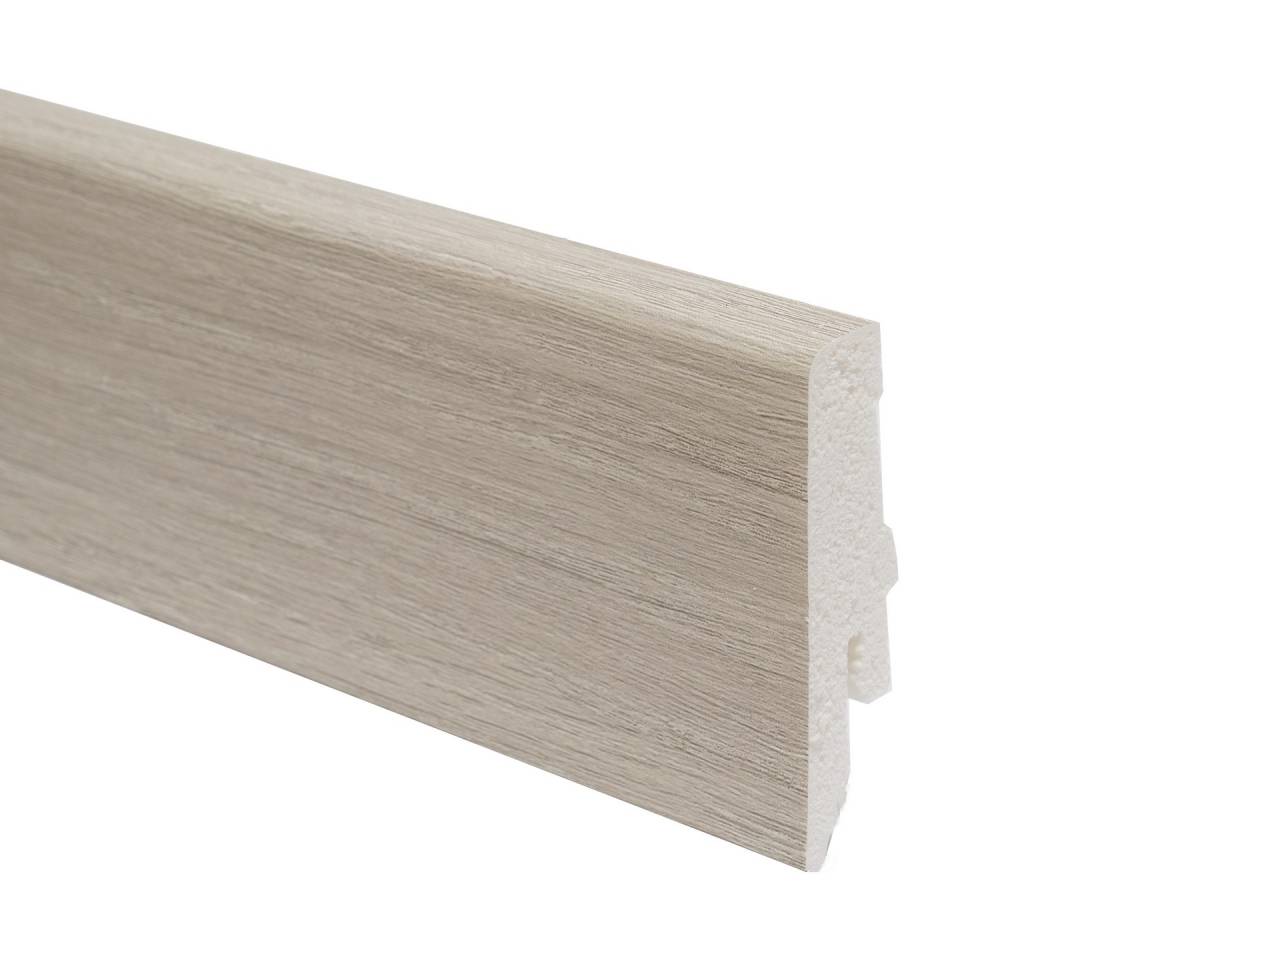 PVC floor skirting L014 with cable channel and height 58 mm, suitable for vinyl flooring in grey colour. Length 2.4 m.